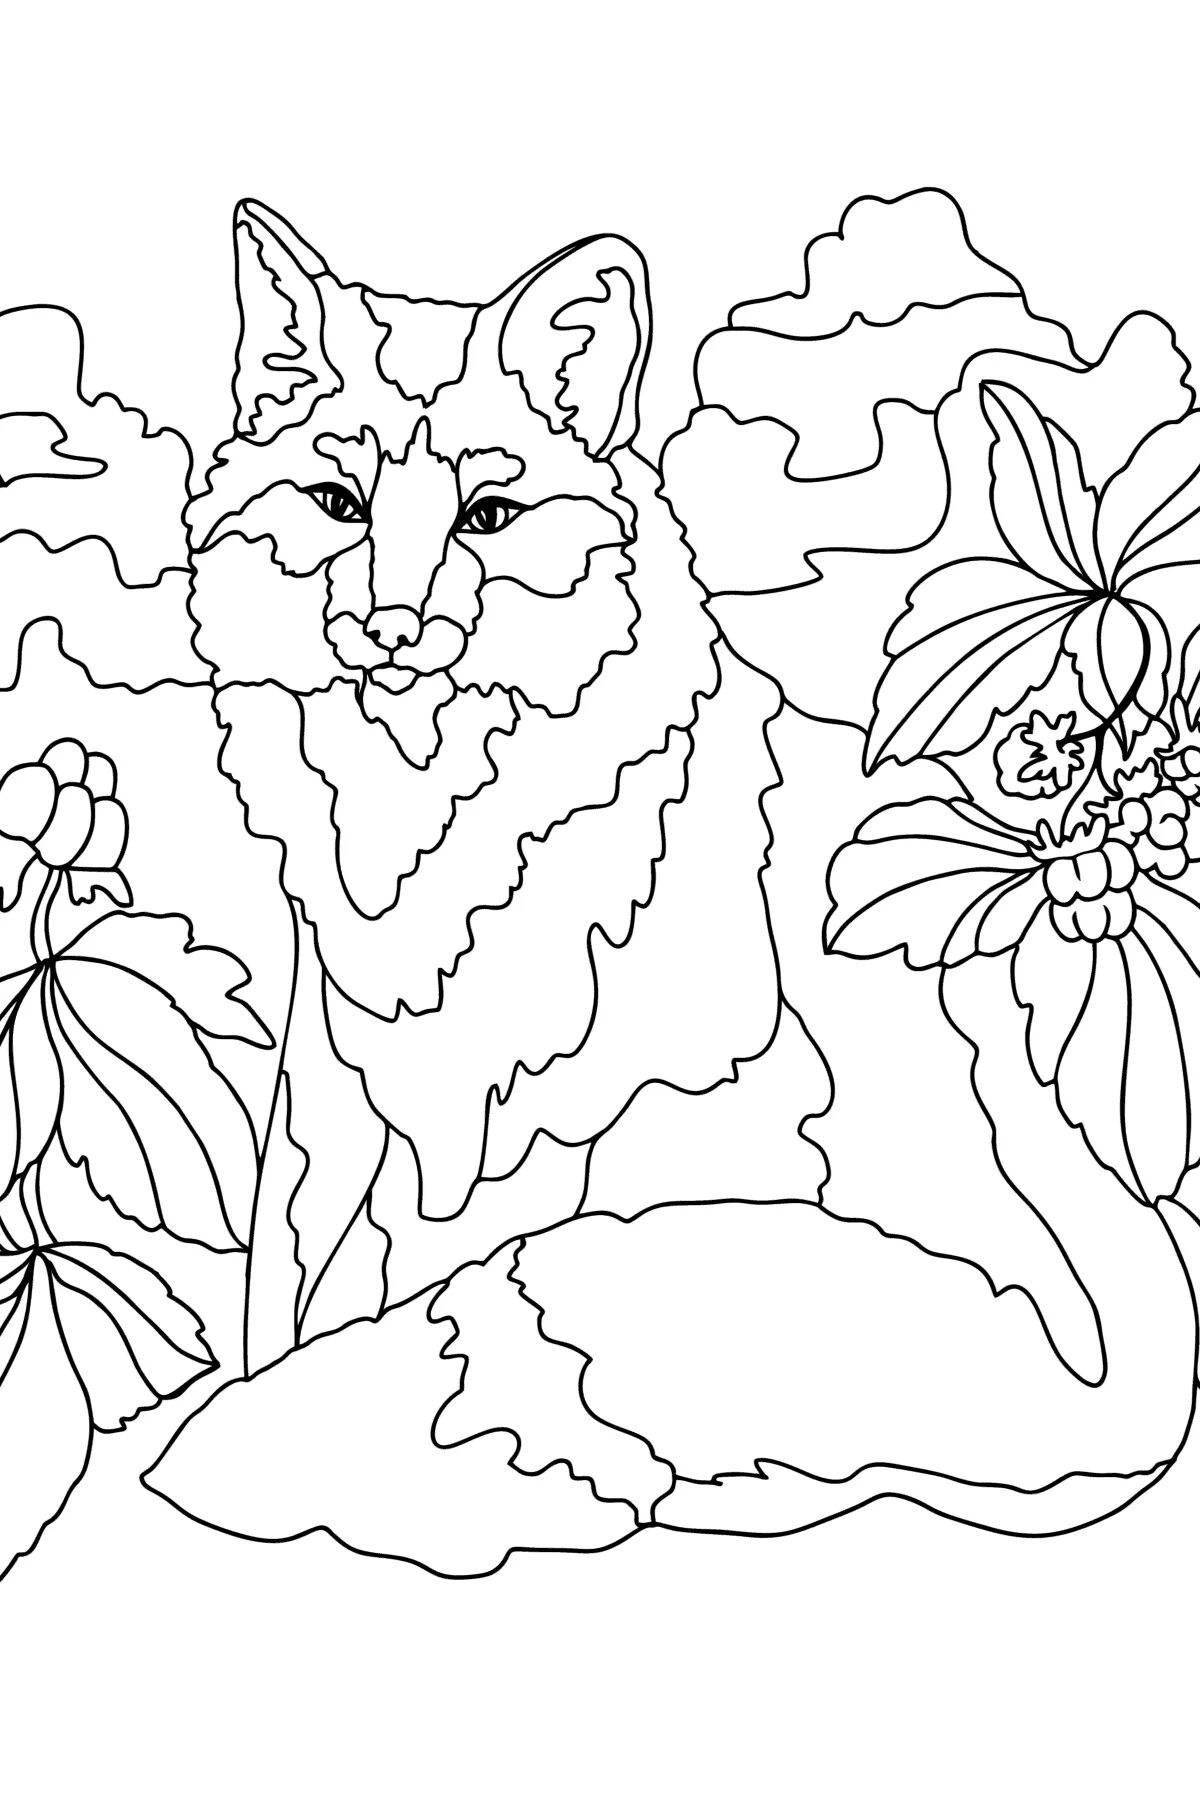 Live fox coloring book for children 6-7 years old